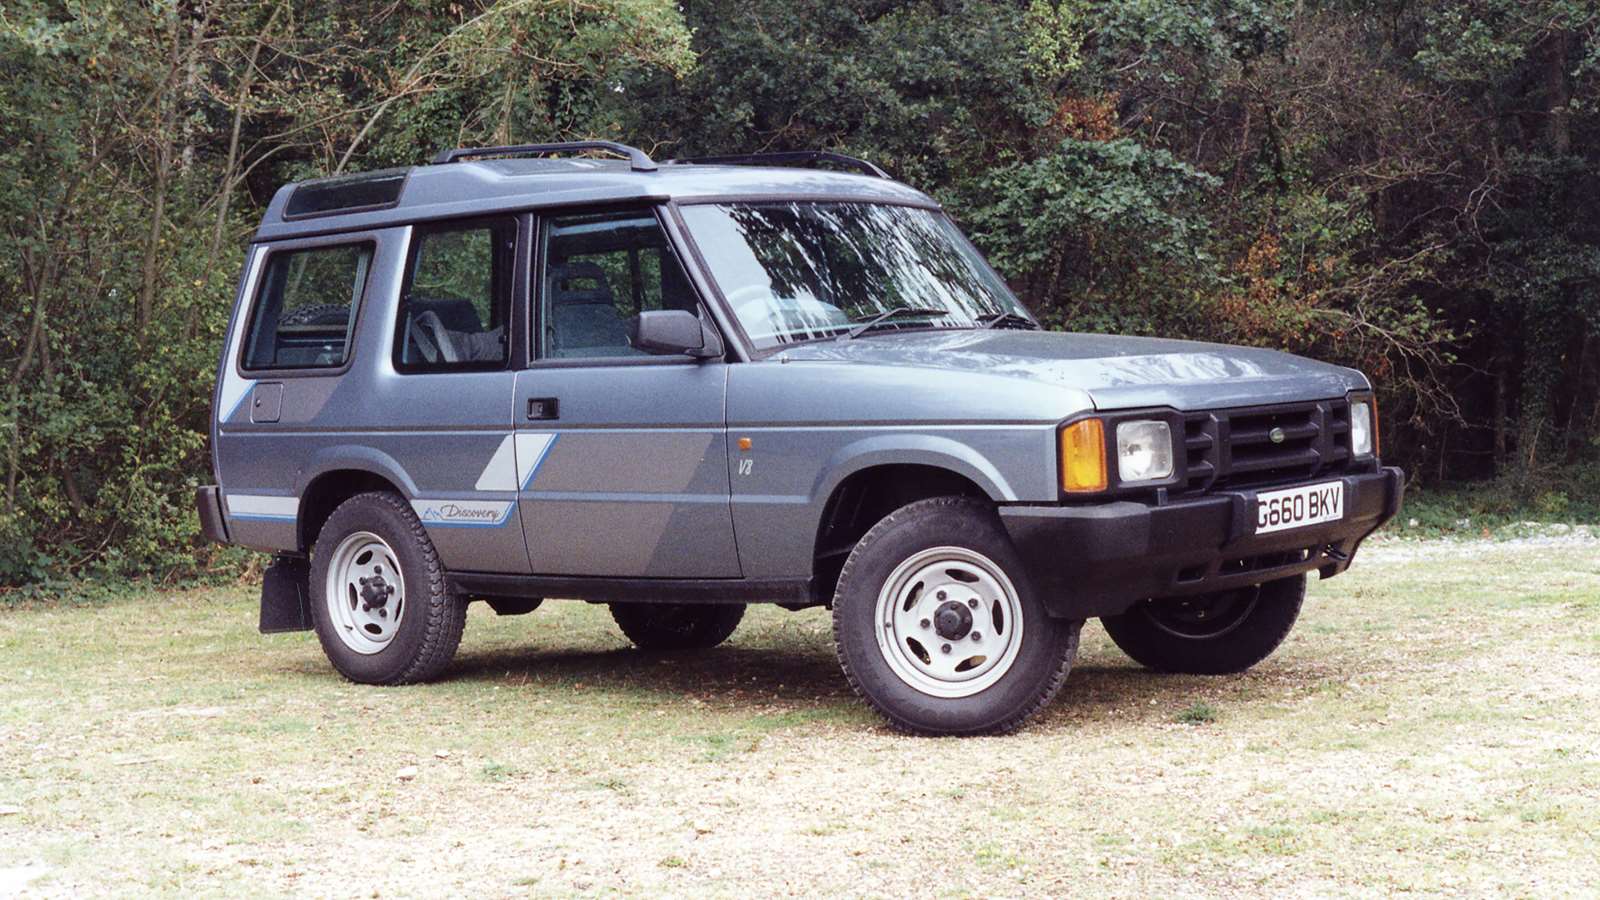 First discovery. Ленд Ровер Дискавери 1 поколения. Ленд Ровер Дискавери 1989. Land Rover Discovery 2.5 МТ, 1995,. Land Rover Discovery 1 1989.